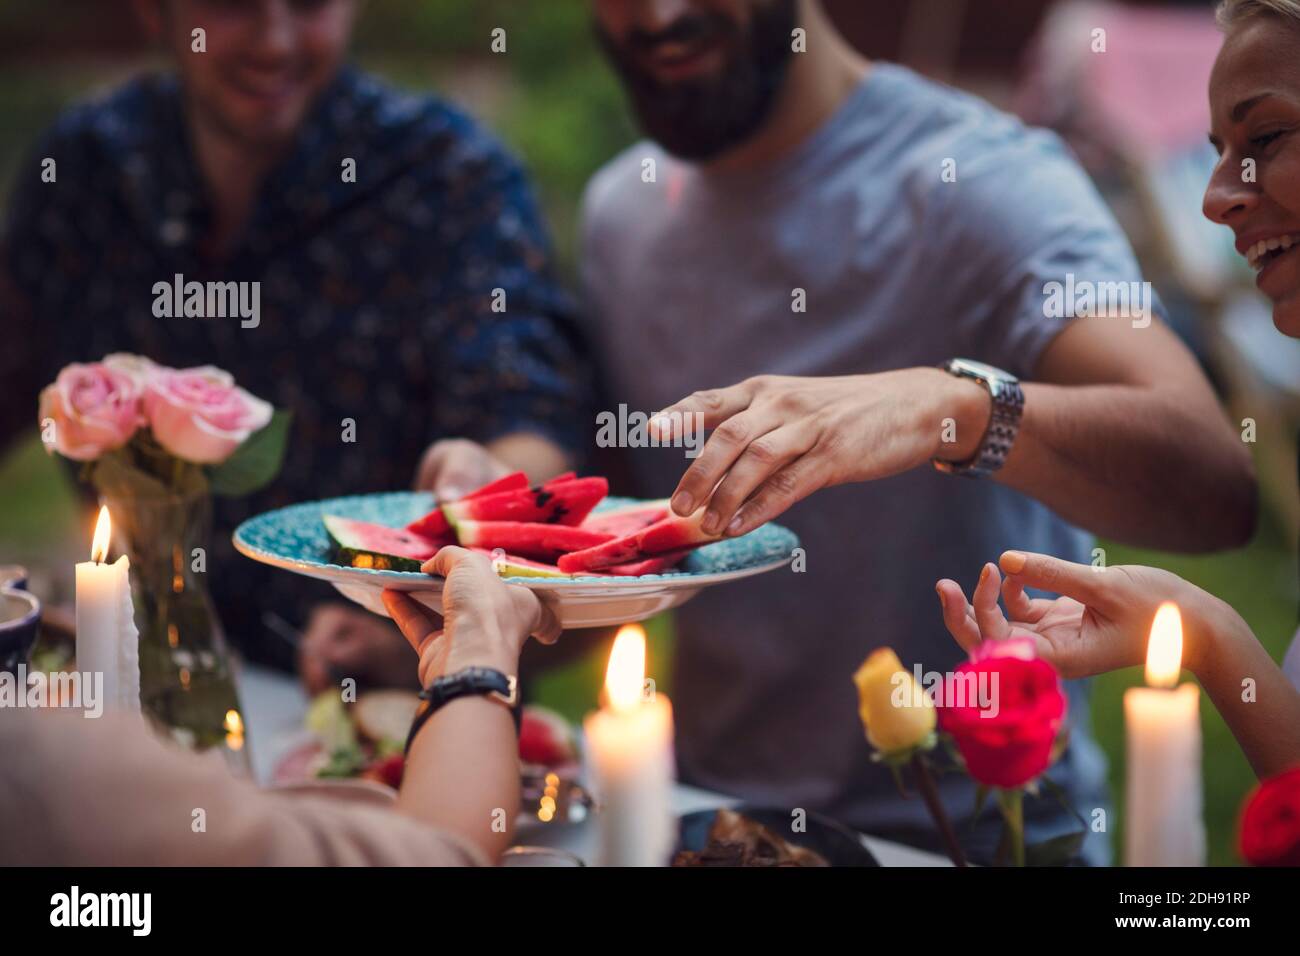 Cropped image of woman serving watermelon slices to friends at garden party Stock Photo